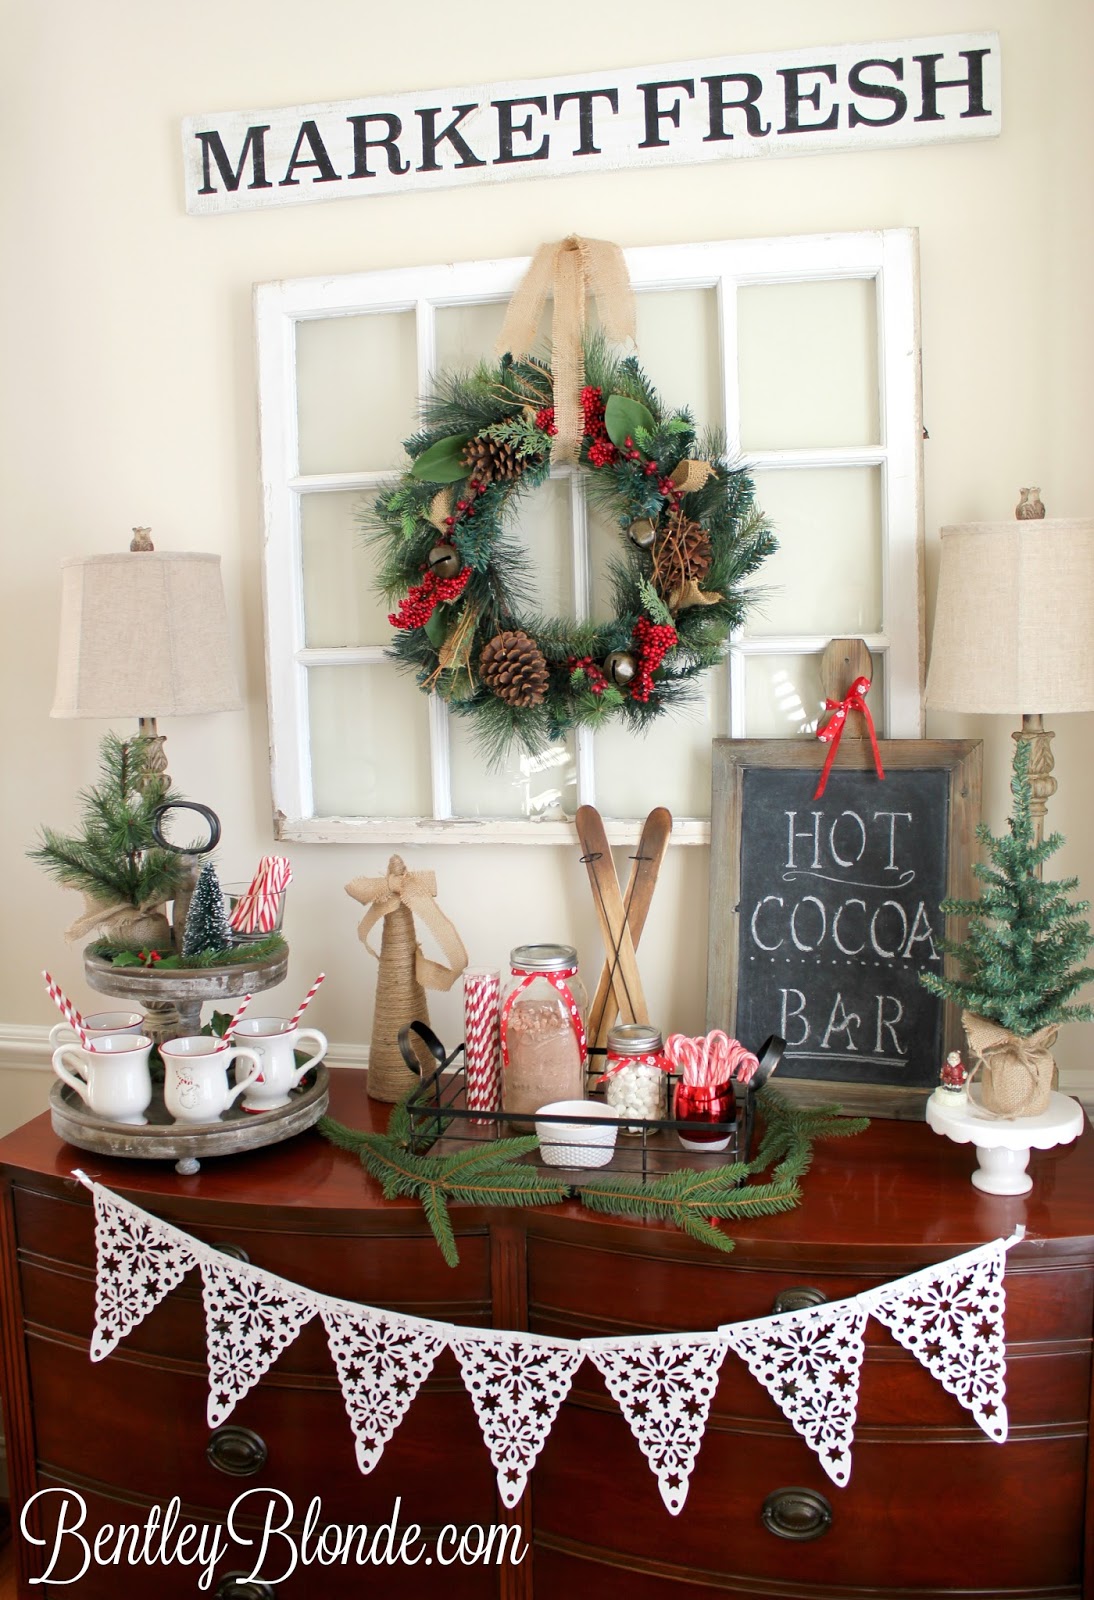 BentleyBlonde Holiday Brunch Ideas Christmas Table, Hot